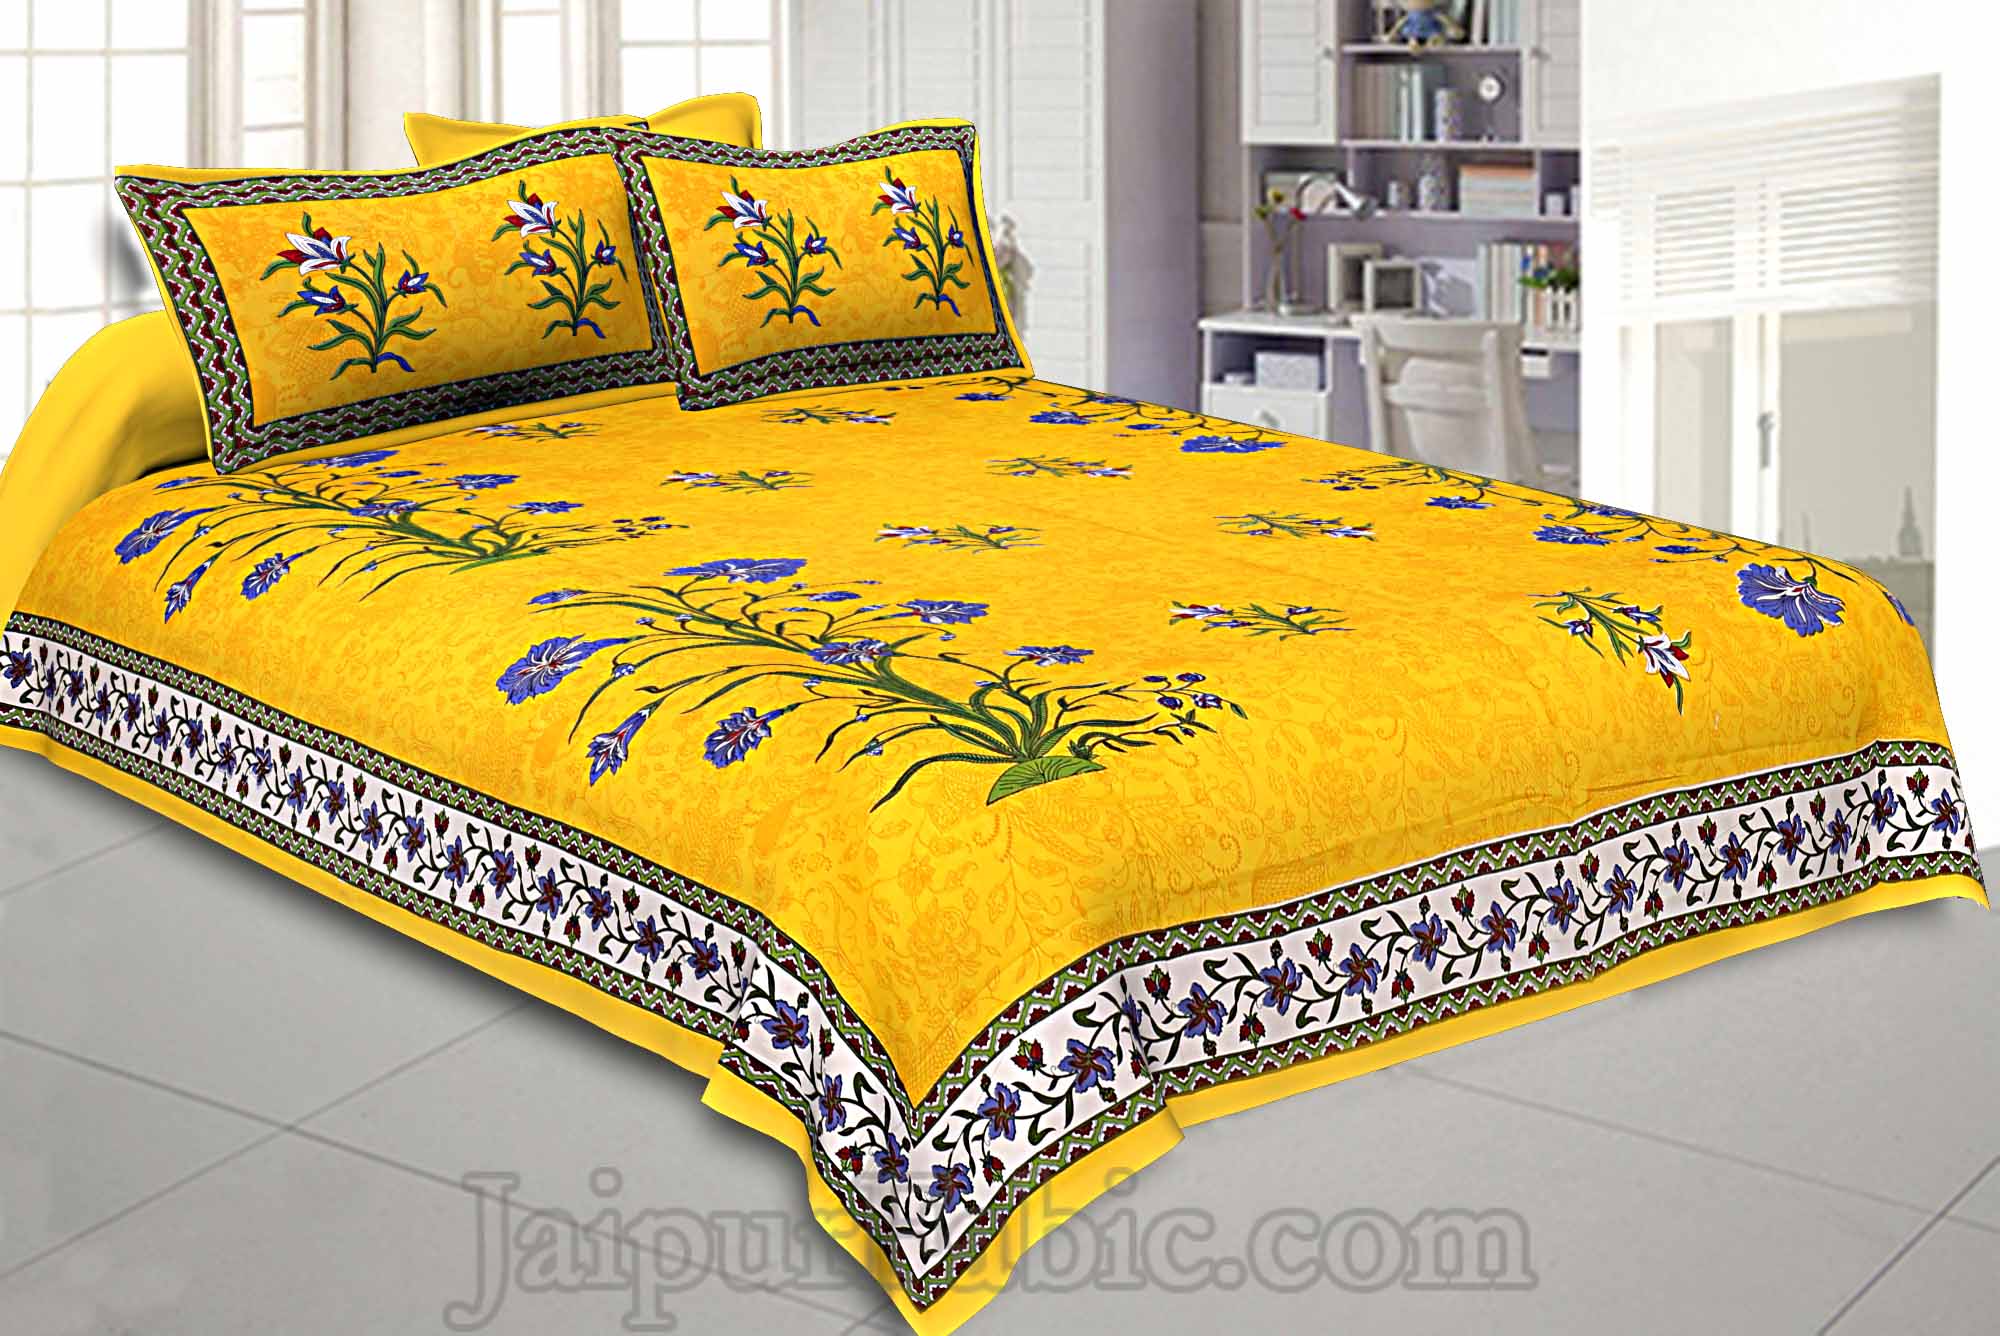 COMBO118 Beautiful Multicolor 4 Bedsheet + 8 Pillow Cover